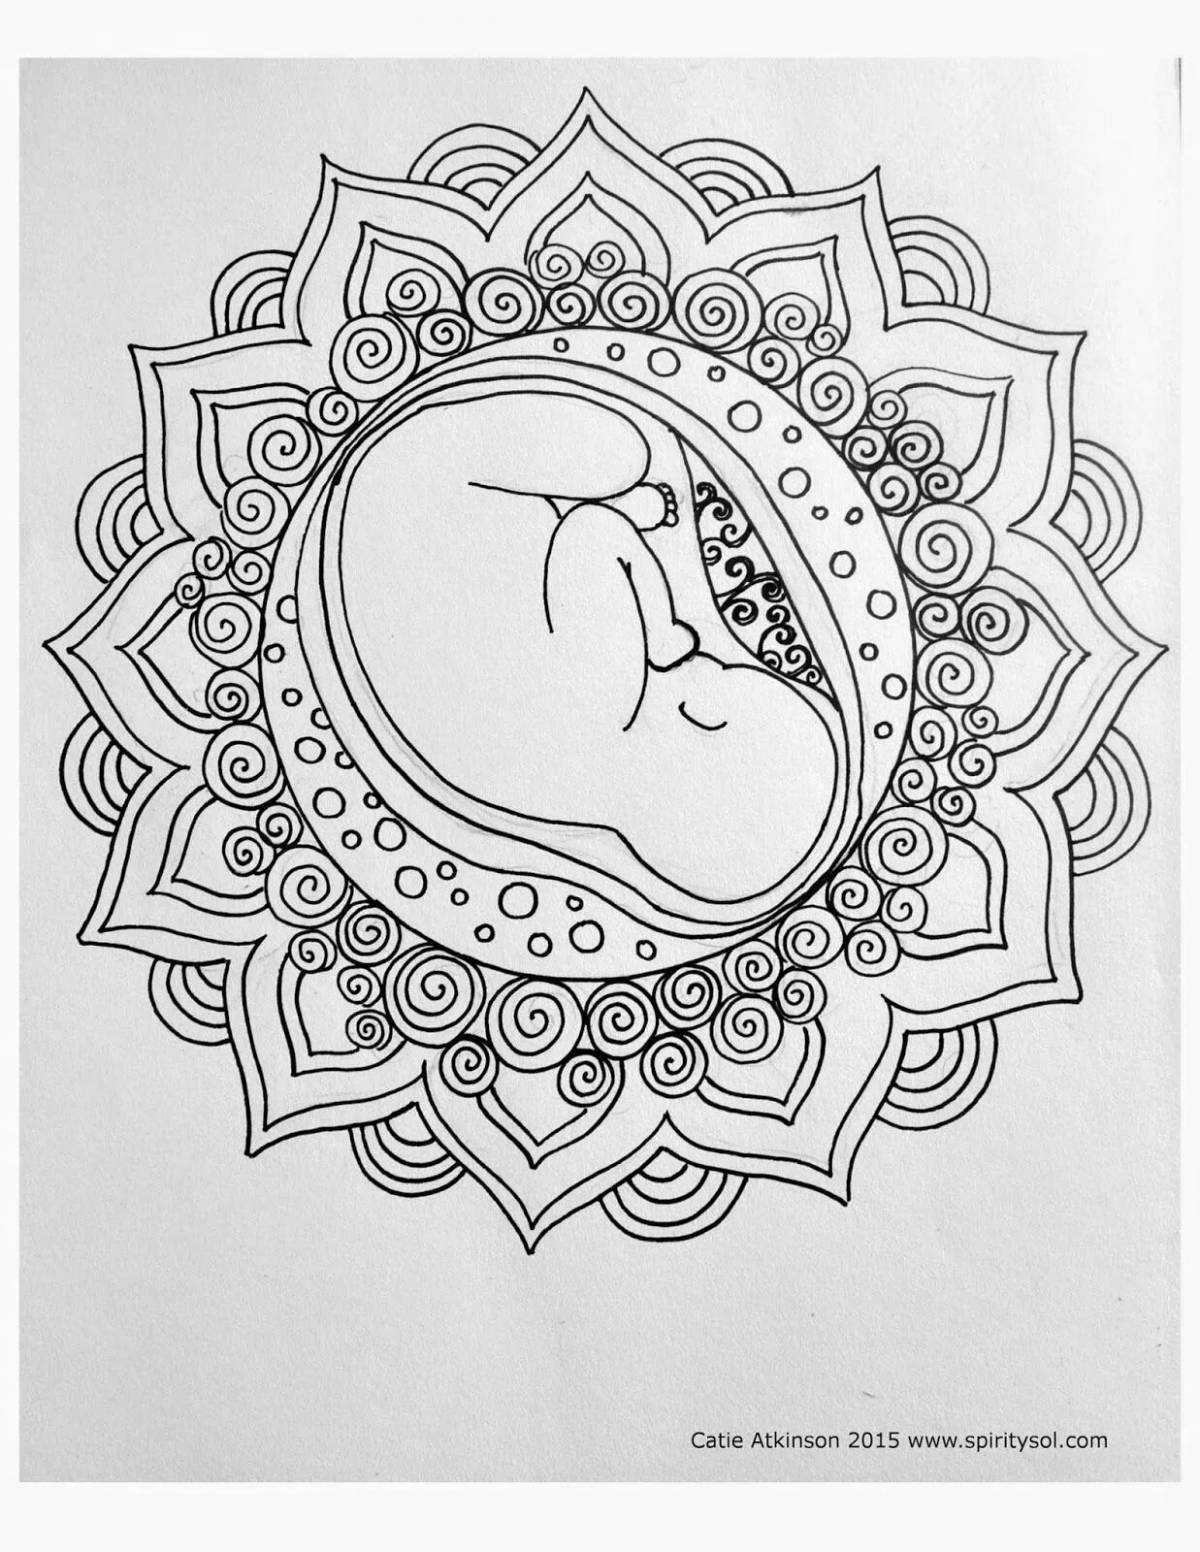 Adorable coloring book for expectant mothers